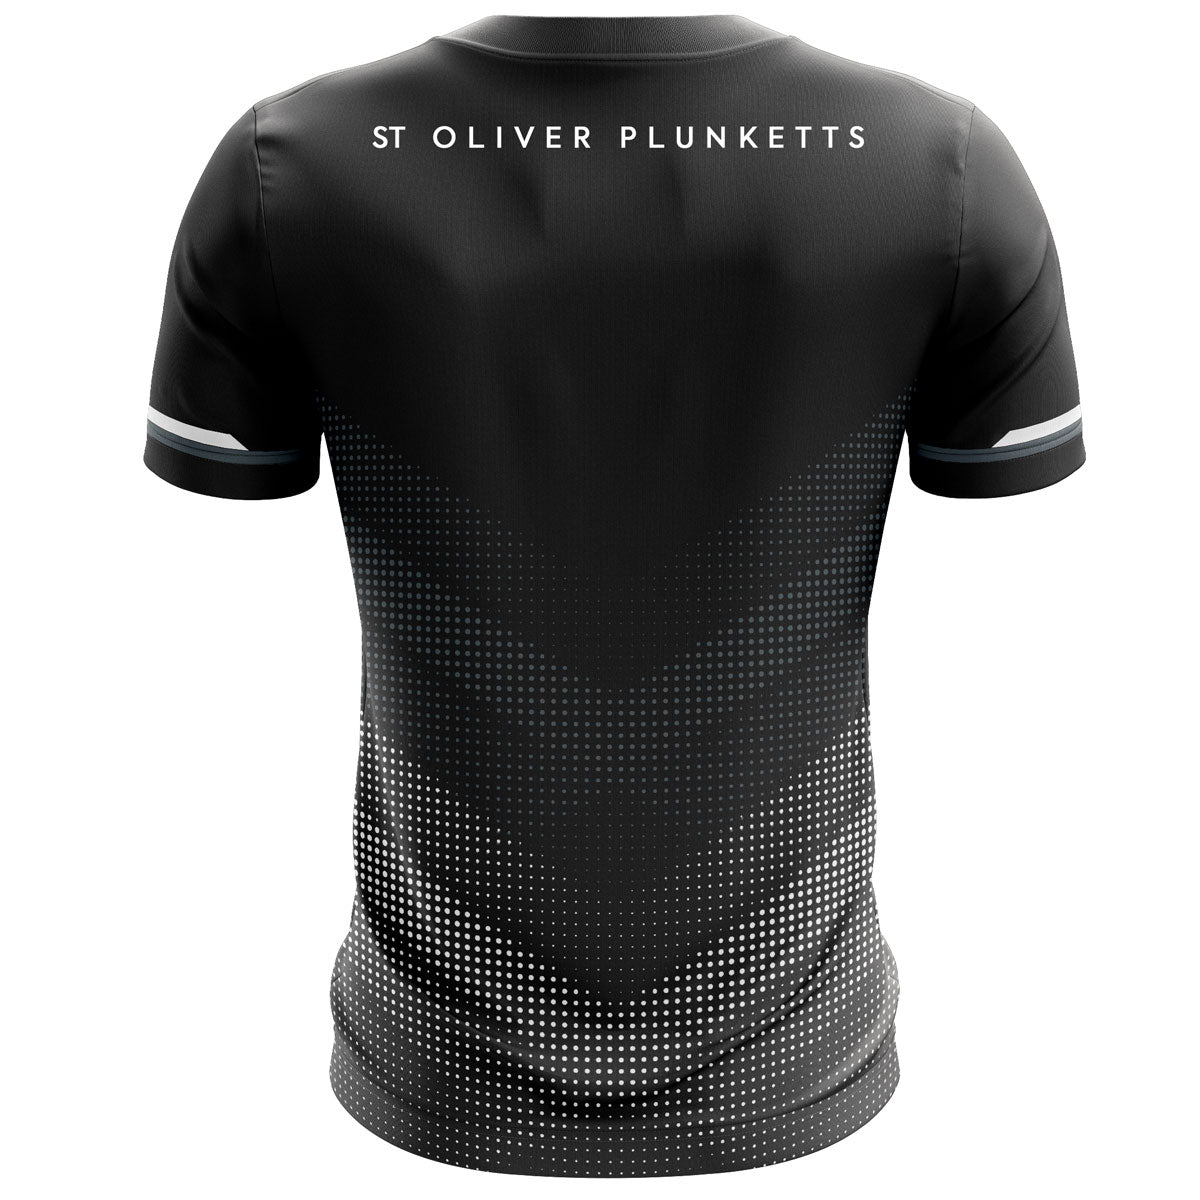 Mc Keever St Oliver Plunketts Cork GAA Training Jersey 2 - Adult - Black/Grey Player Fit